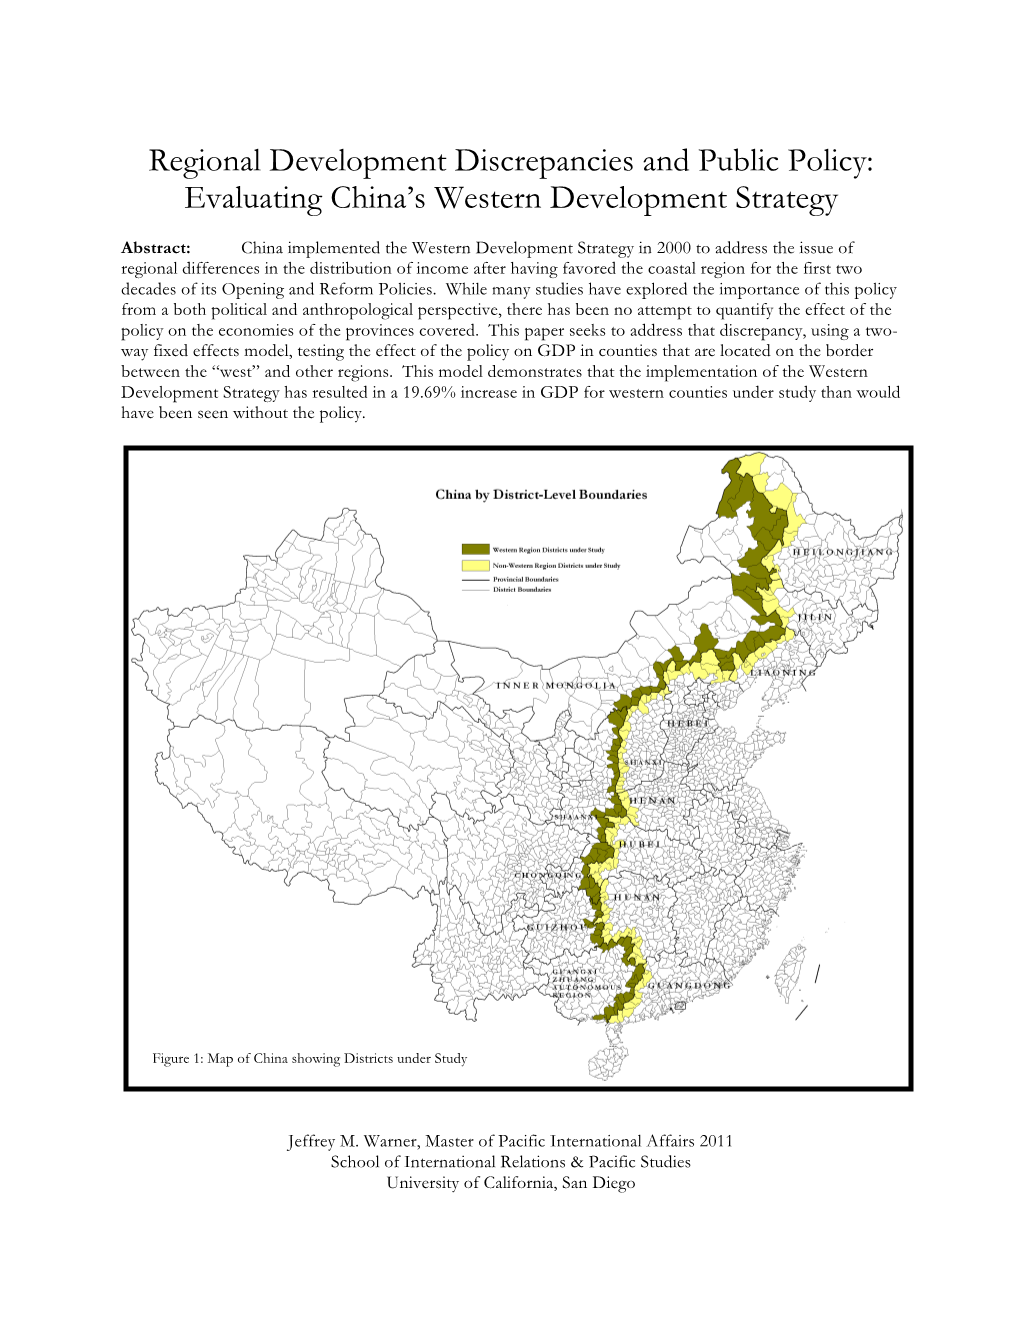 Evaluating China's Western Development Strategy